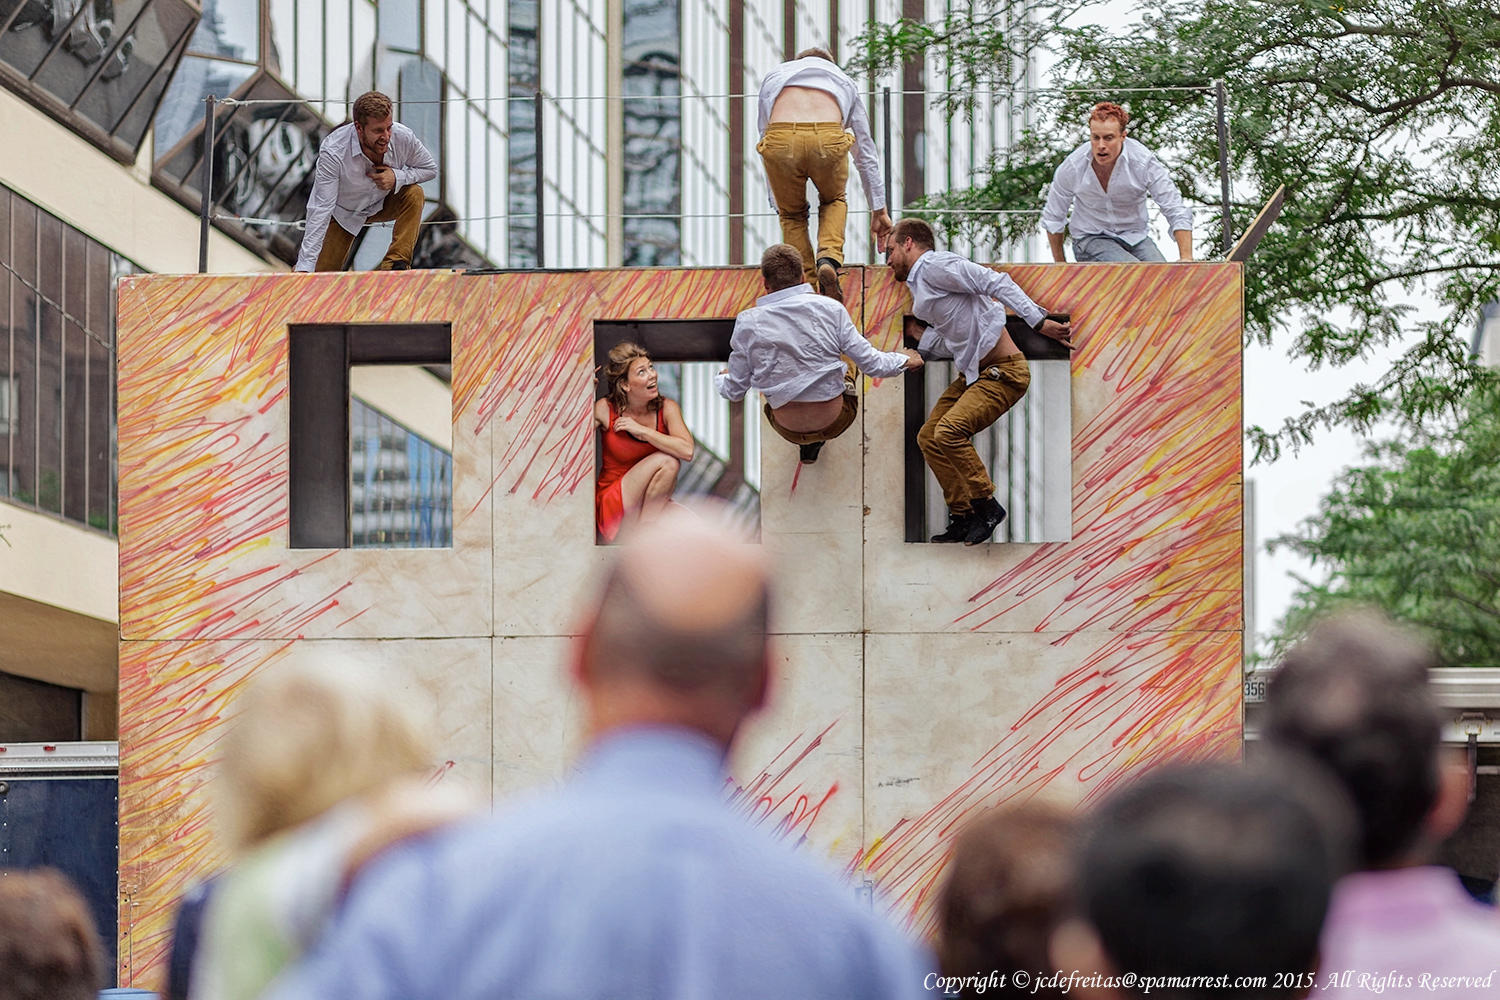 2015 Catwall Acrobats Trampo Wall - Buskerfest Toronto, Ontario - Canada